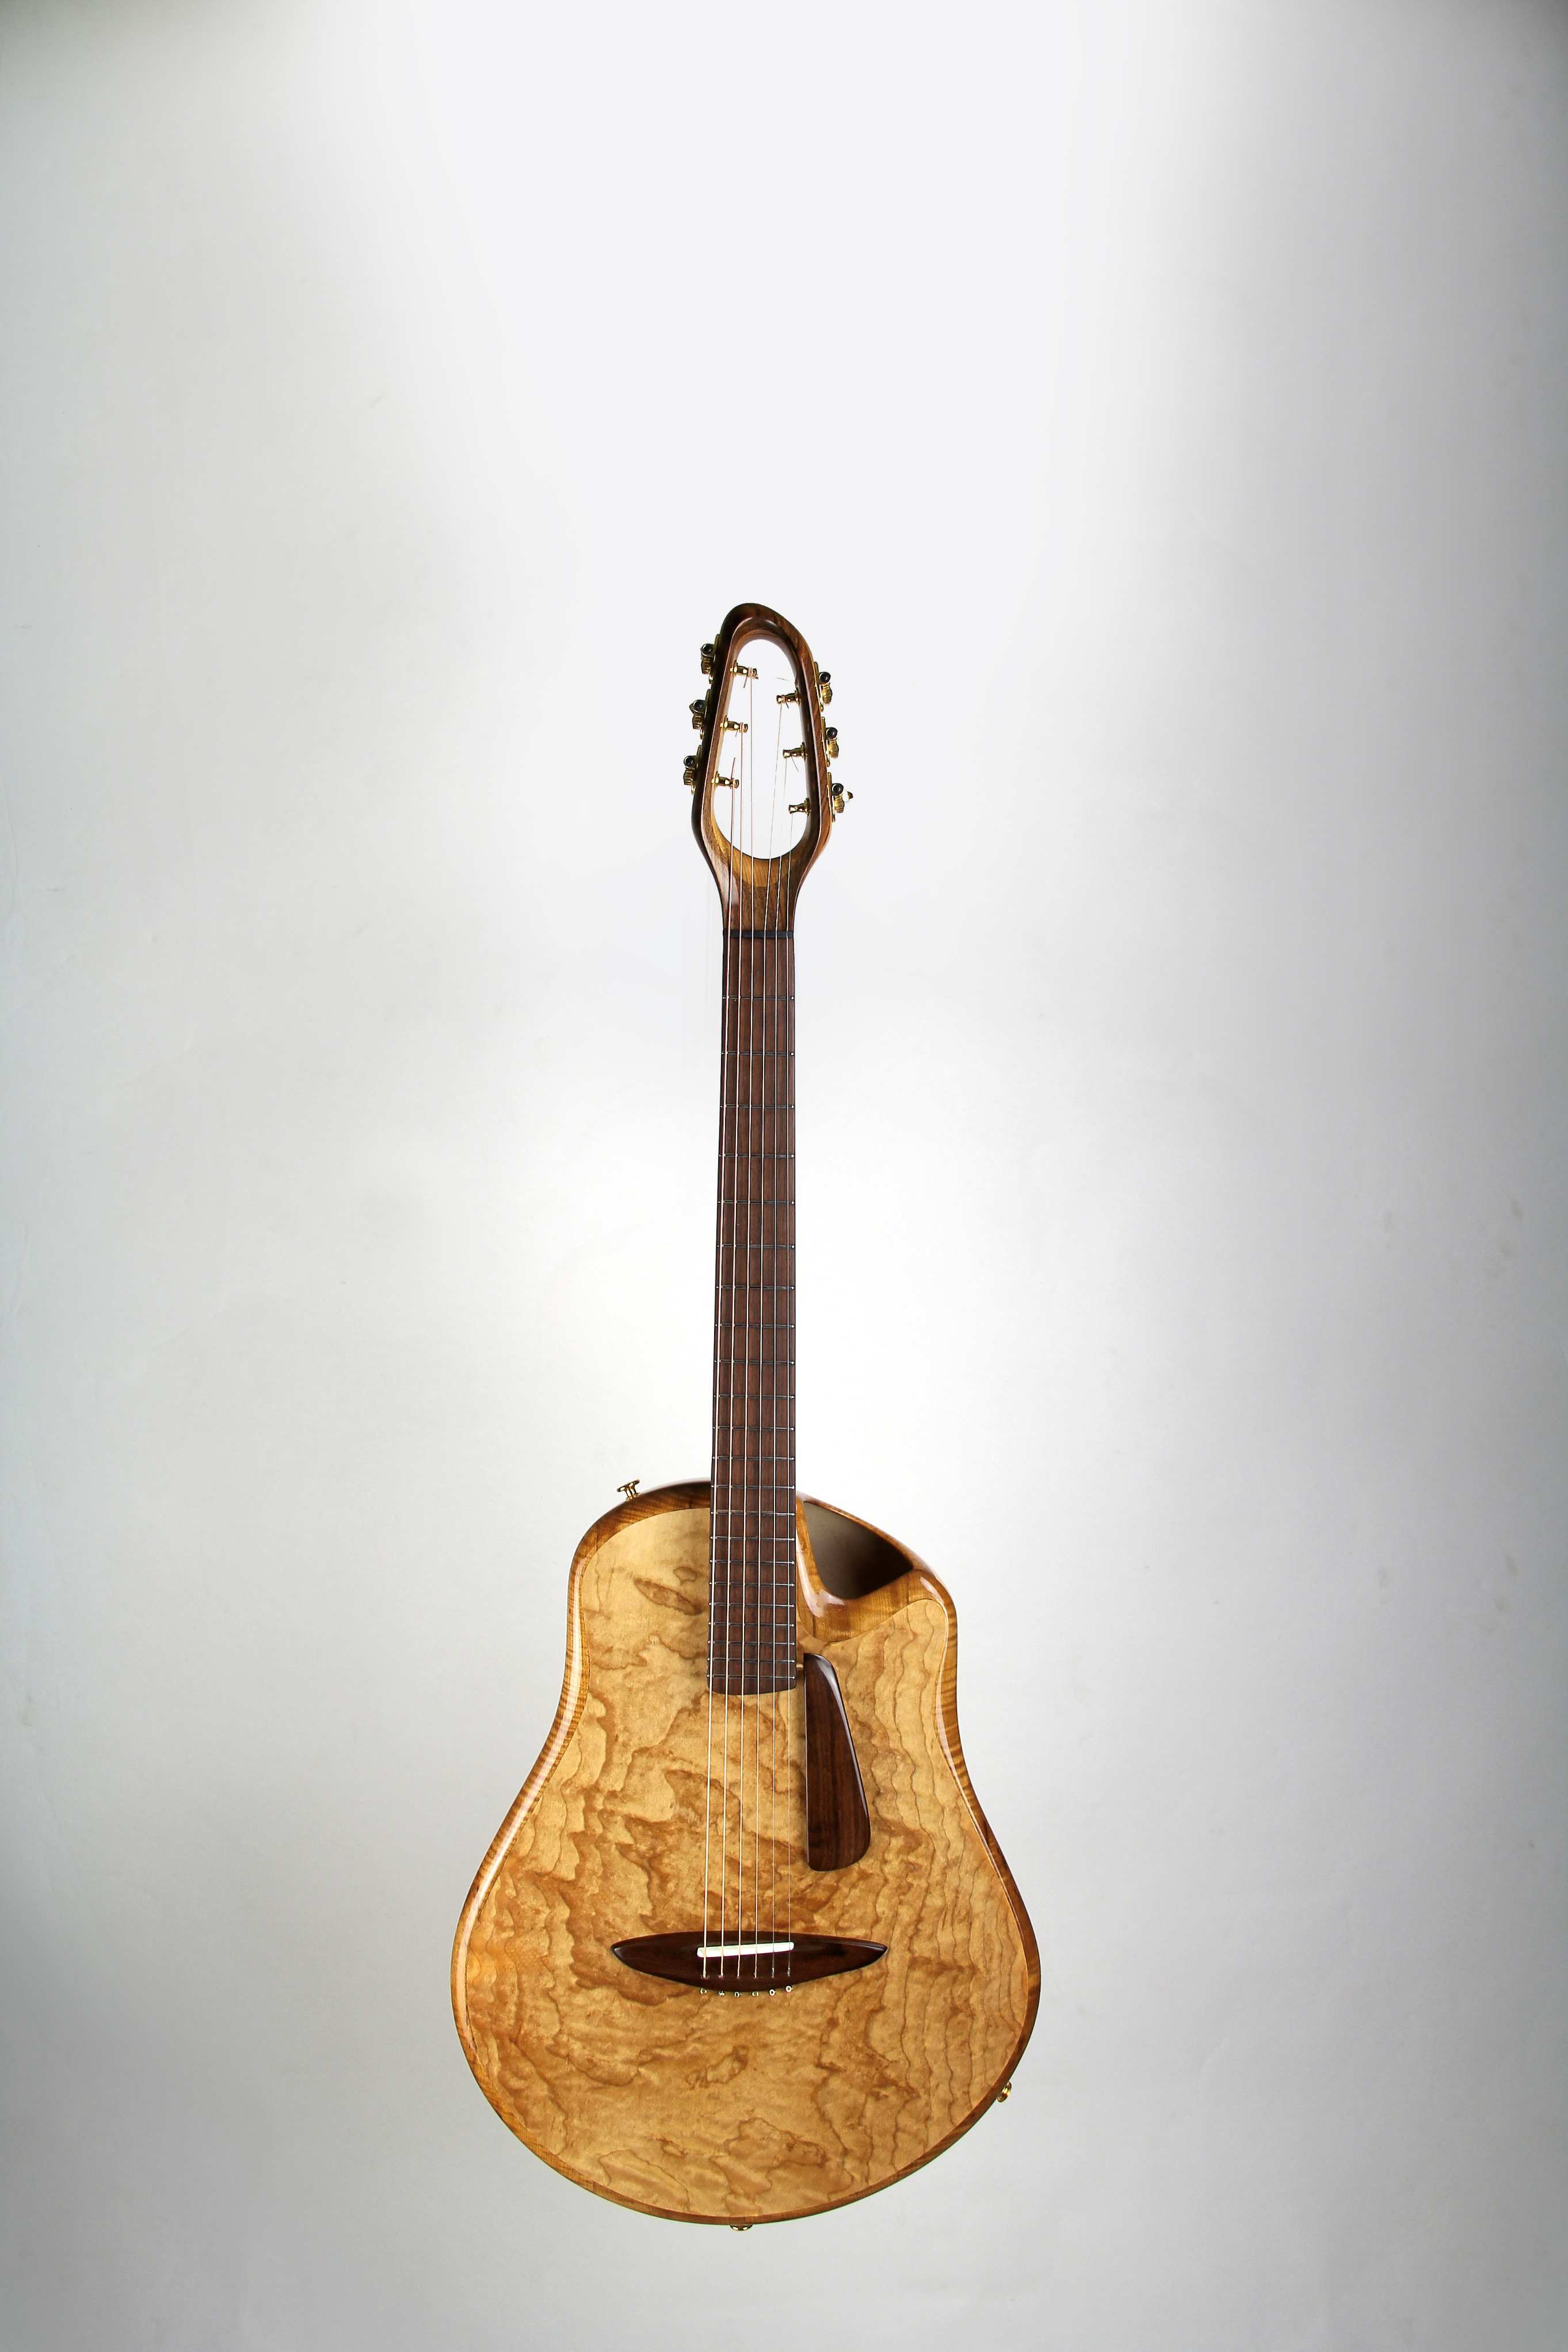 CannaGuitar with top from Sonoveneer flamed maple, fretboard and bridge from Sonowood walnut